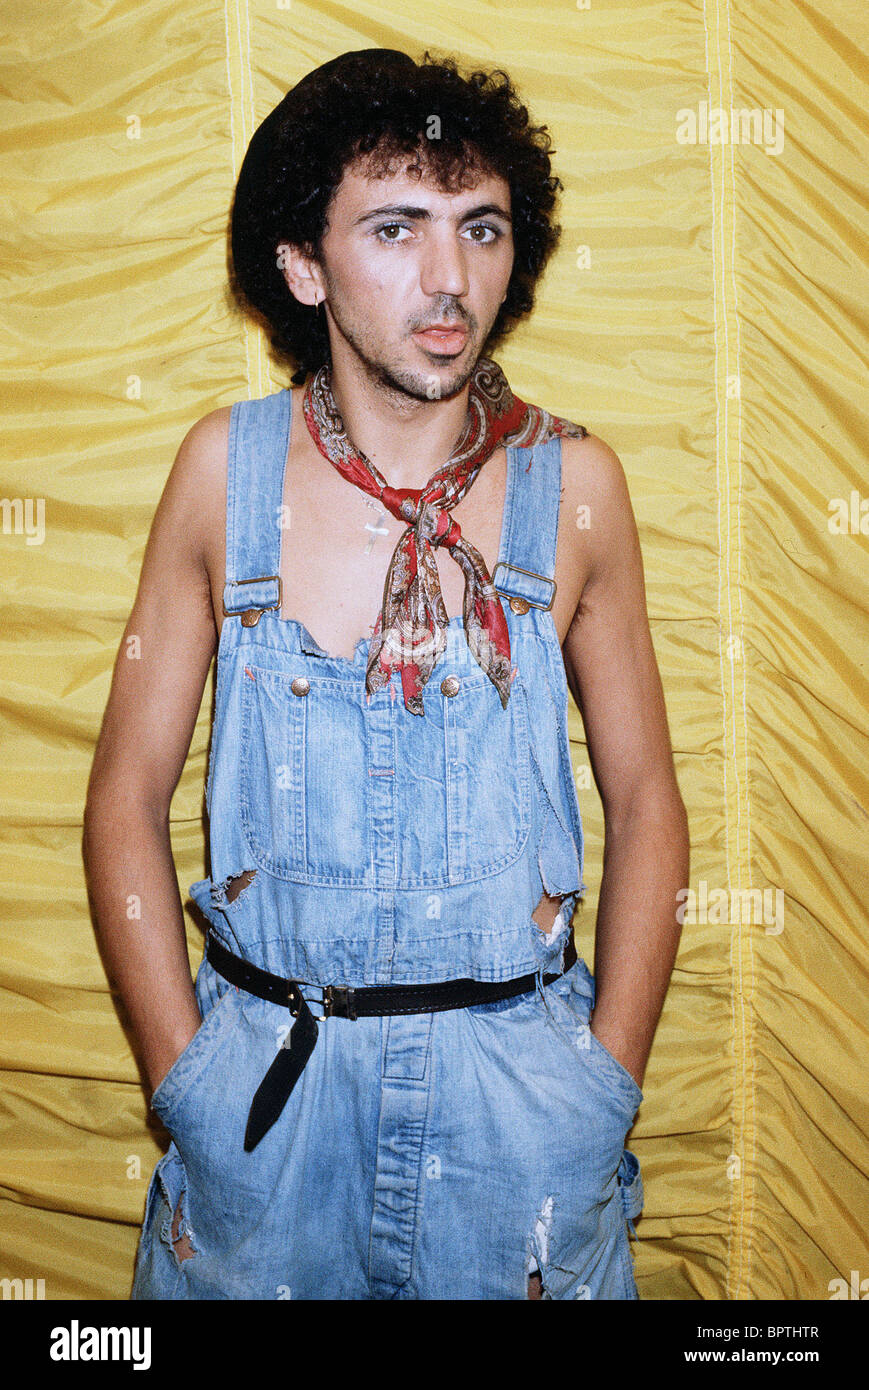 kevin-rowland-dexys-midnight-runners-198